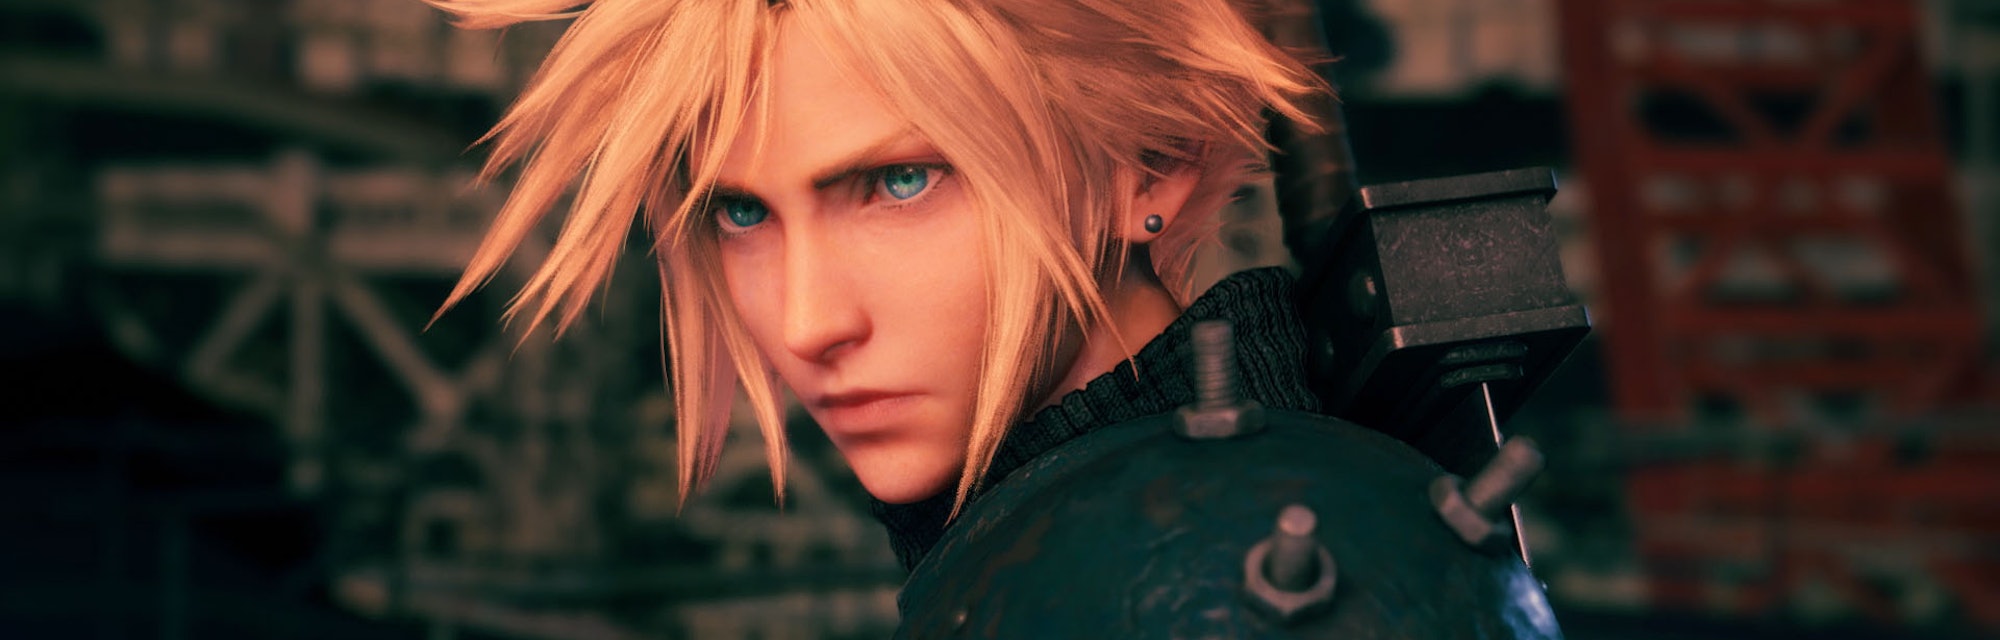 Is 'Final Fantasy 7' on Xbox One? How to play the game that 